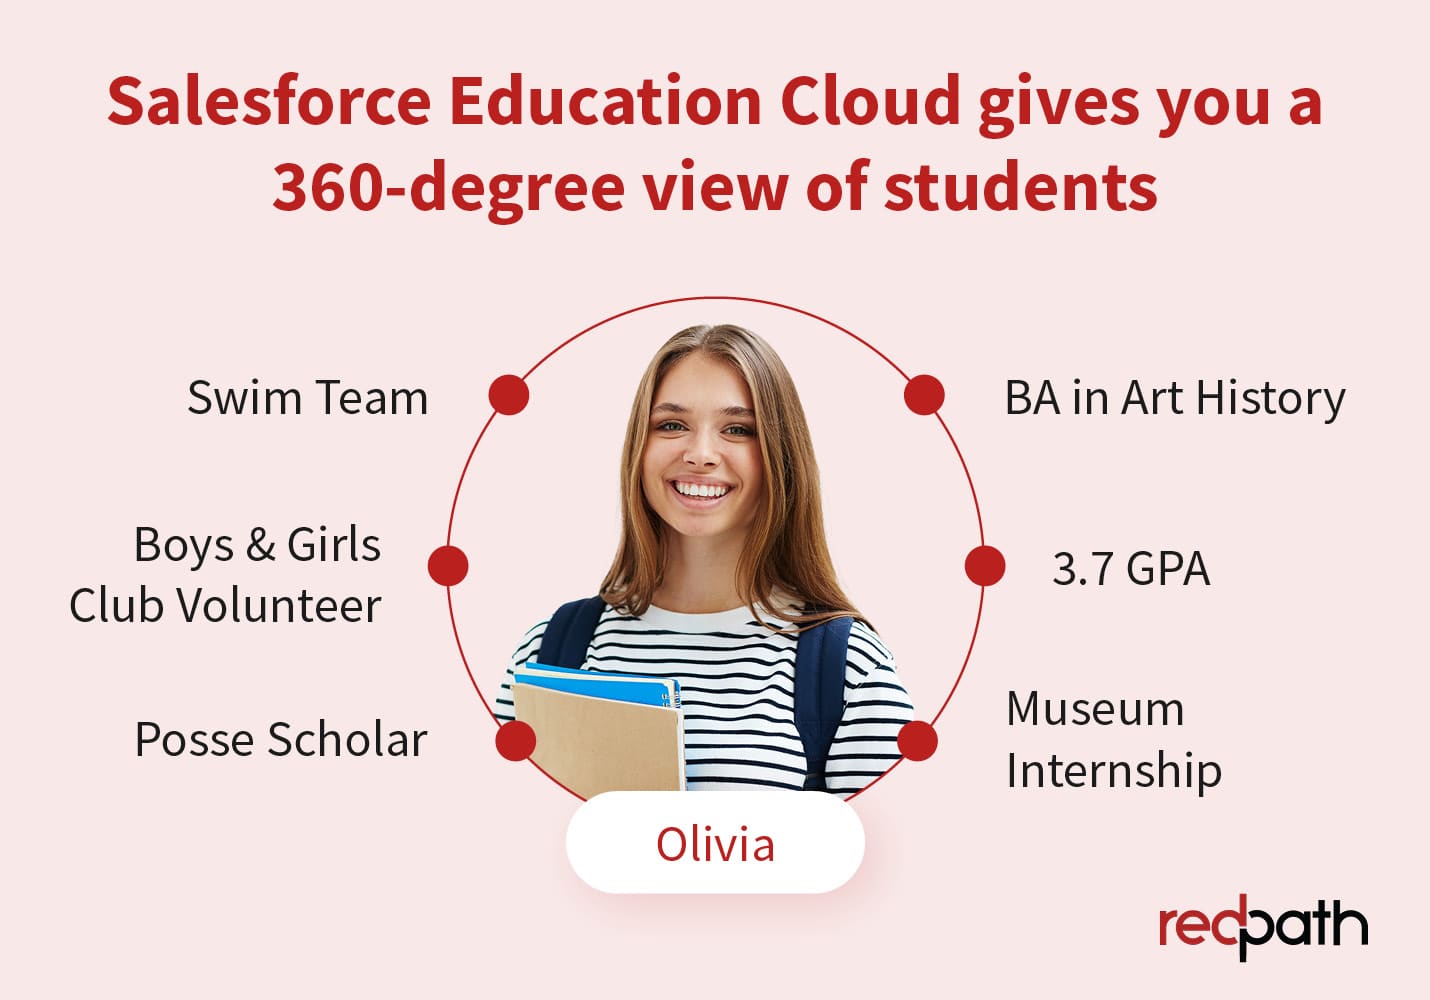 This graphic is a visual representation of how Salesforce Education Cloud gives you a 360-degree view of students.